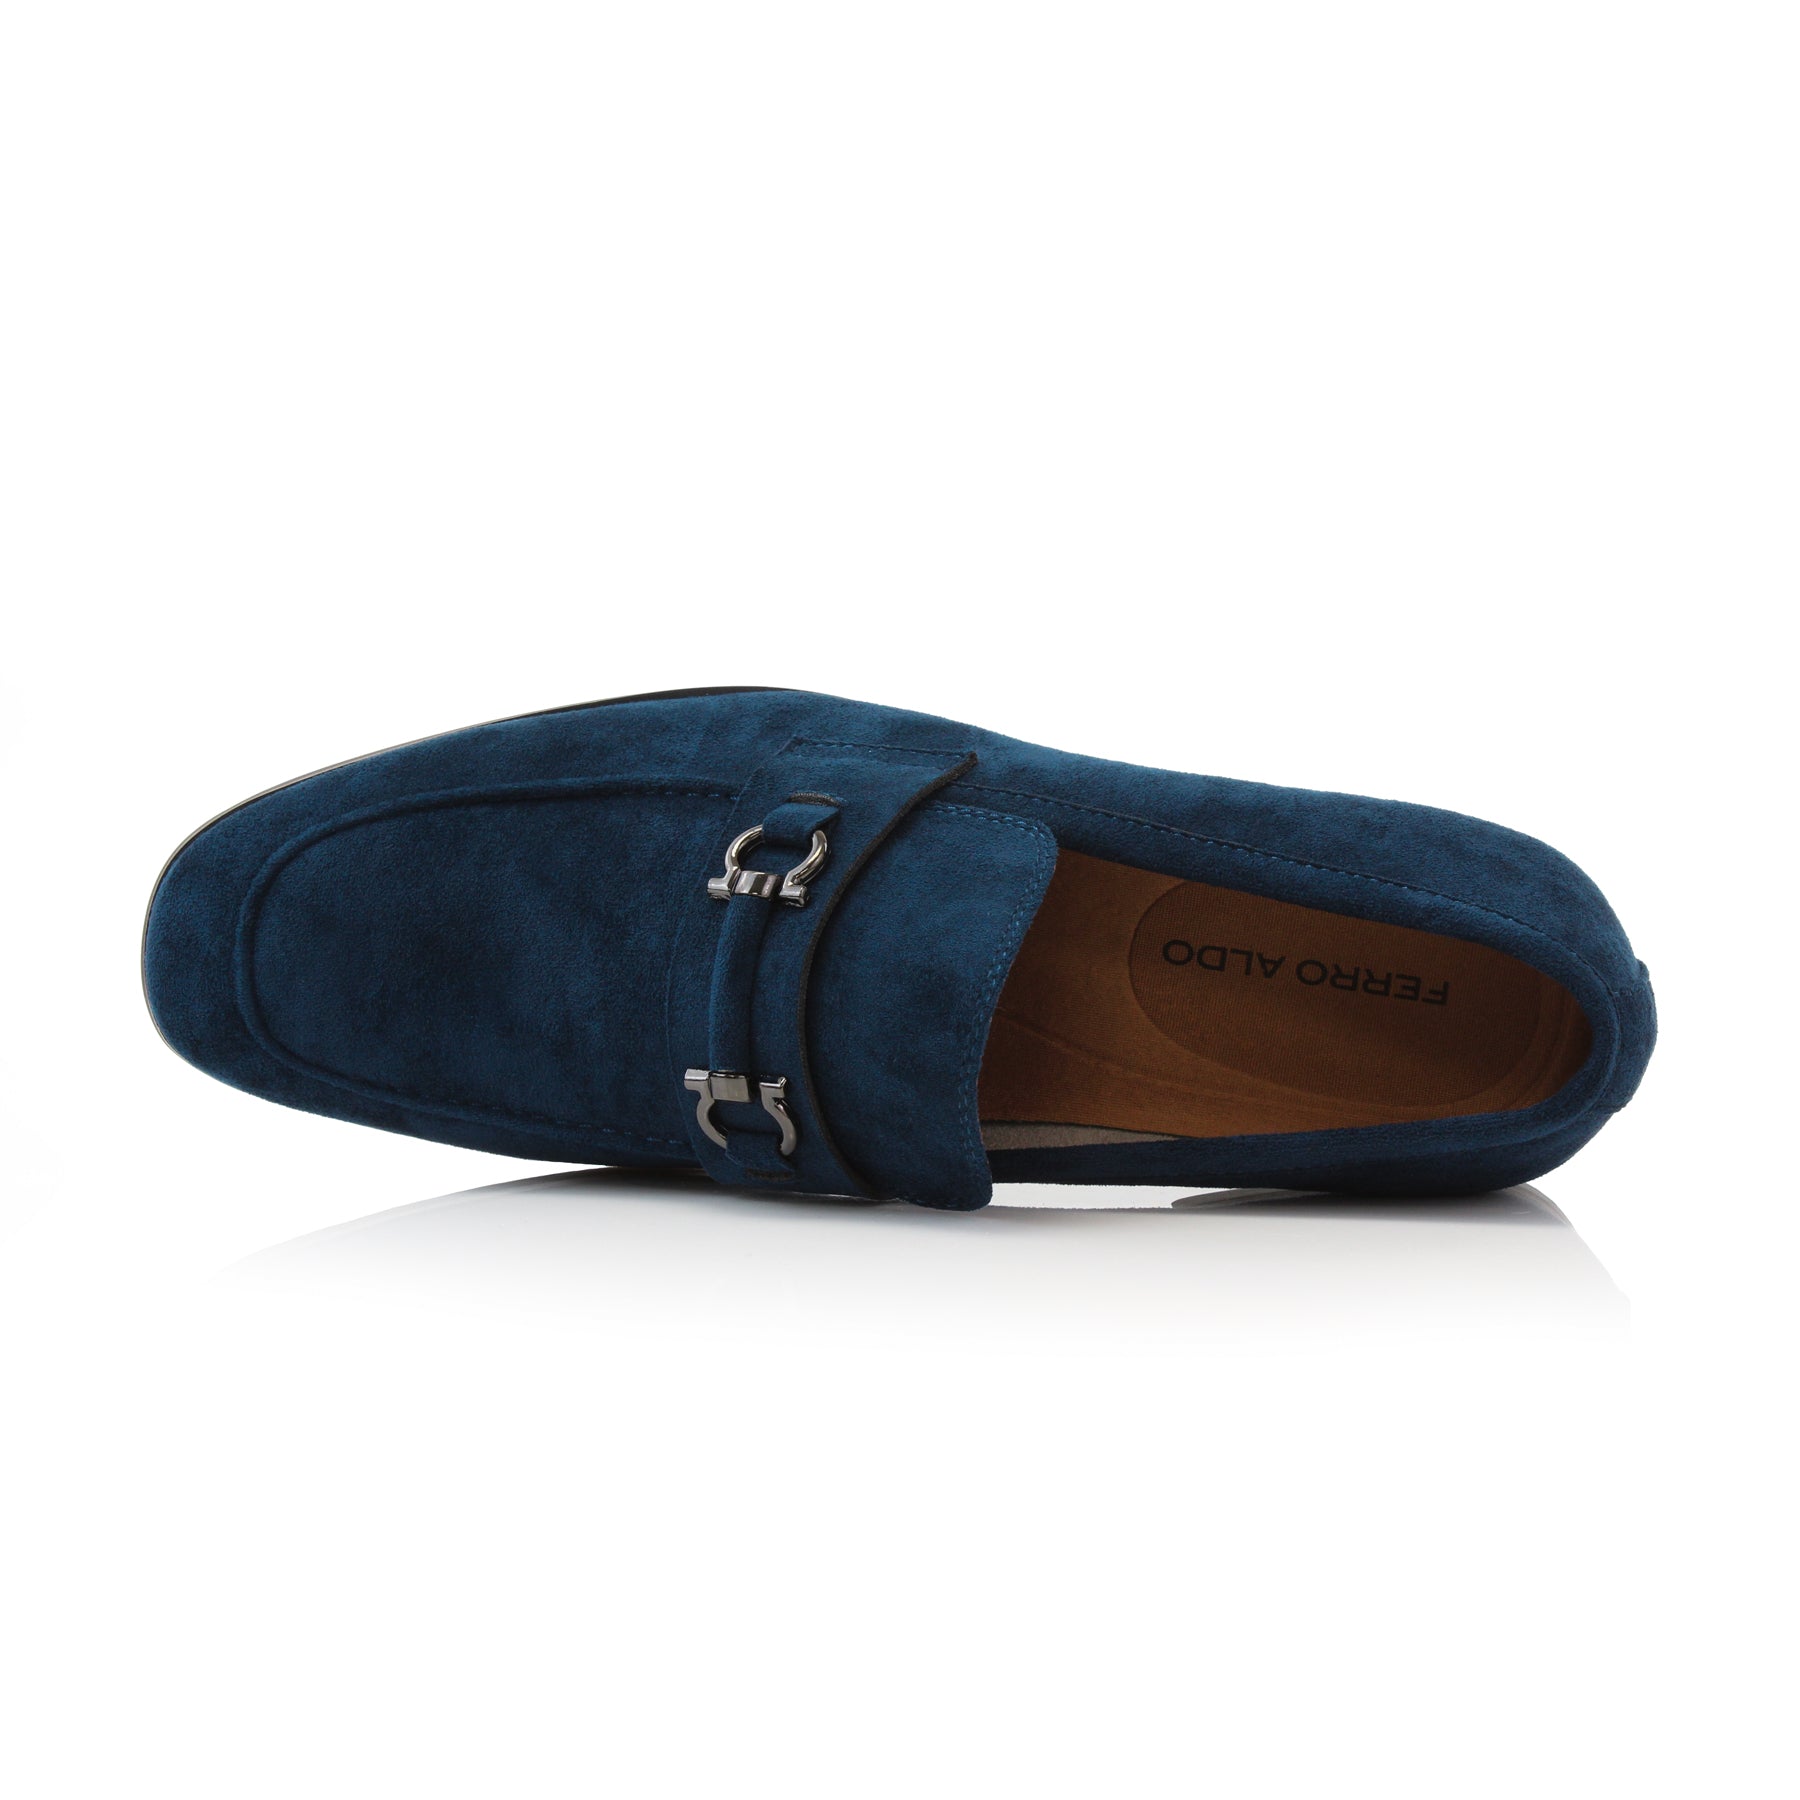 Metal Buckle Suede Loafers | Demitri by Ferro Aldo | Conal Footwear | Top-Down Angle View